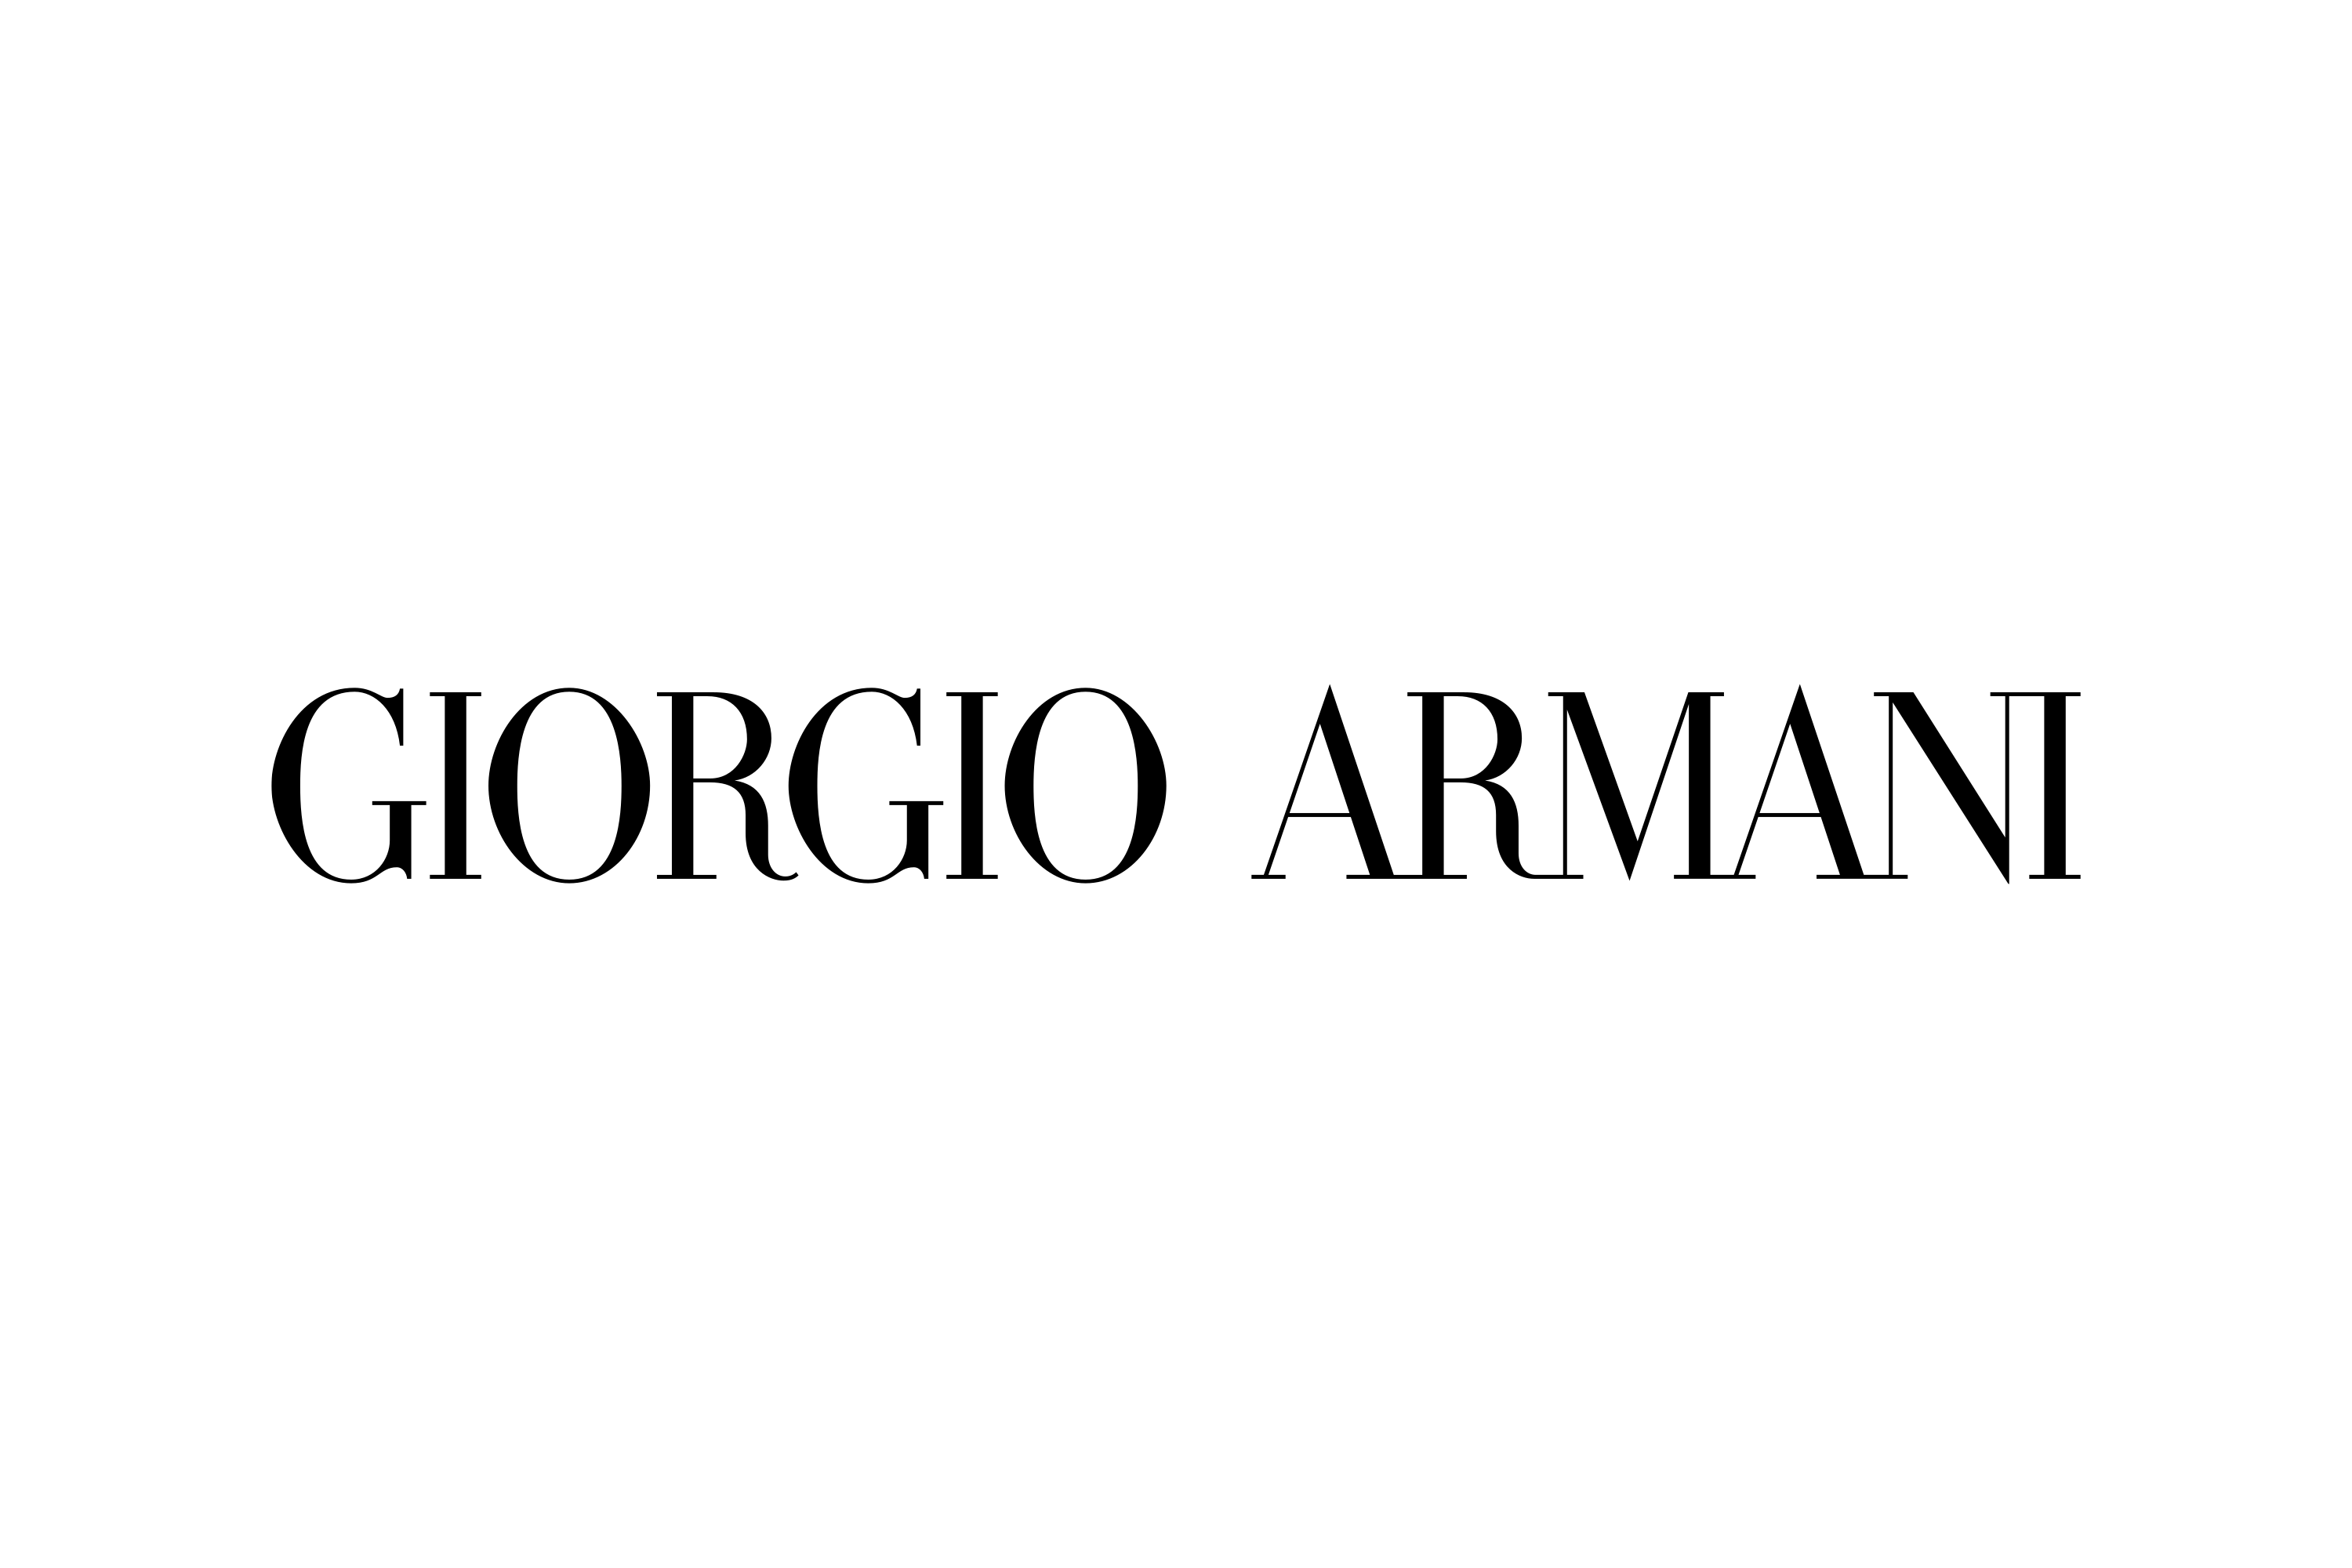 Download Armani Logo in SVG Vector or PNG File Format 